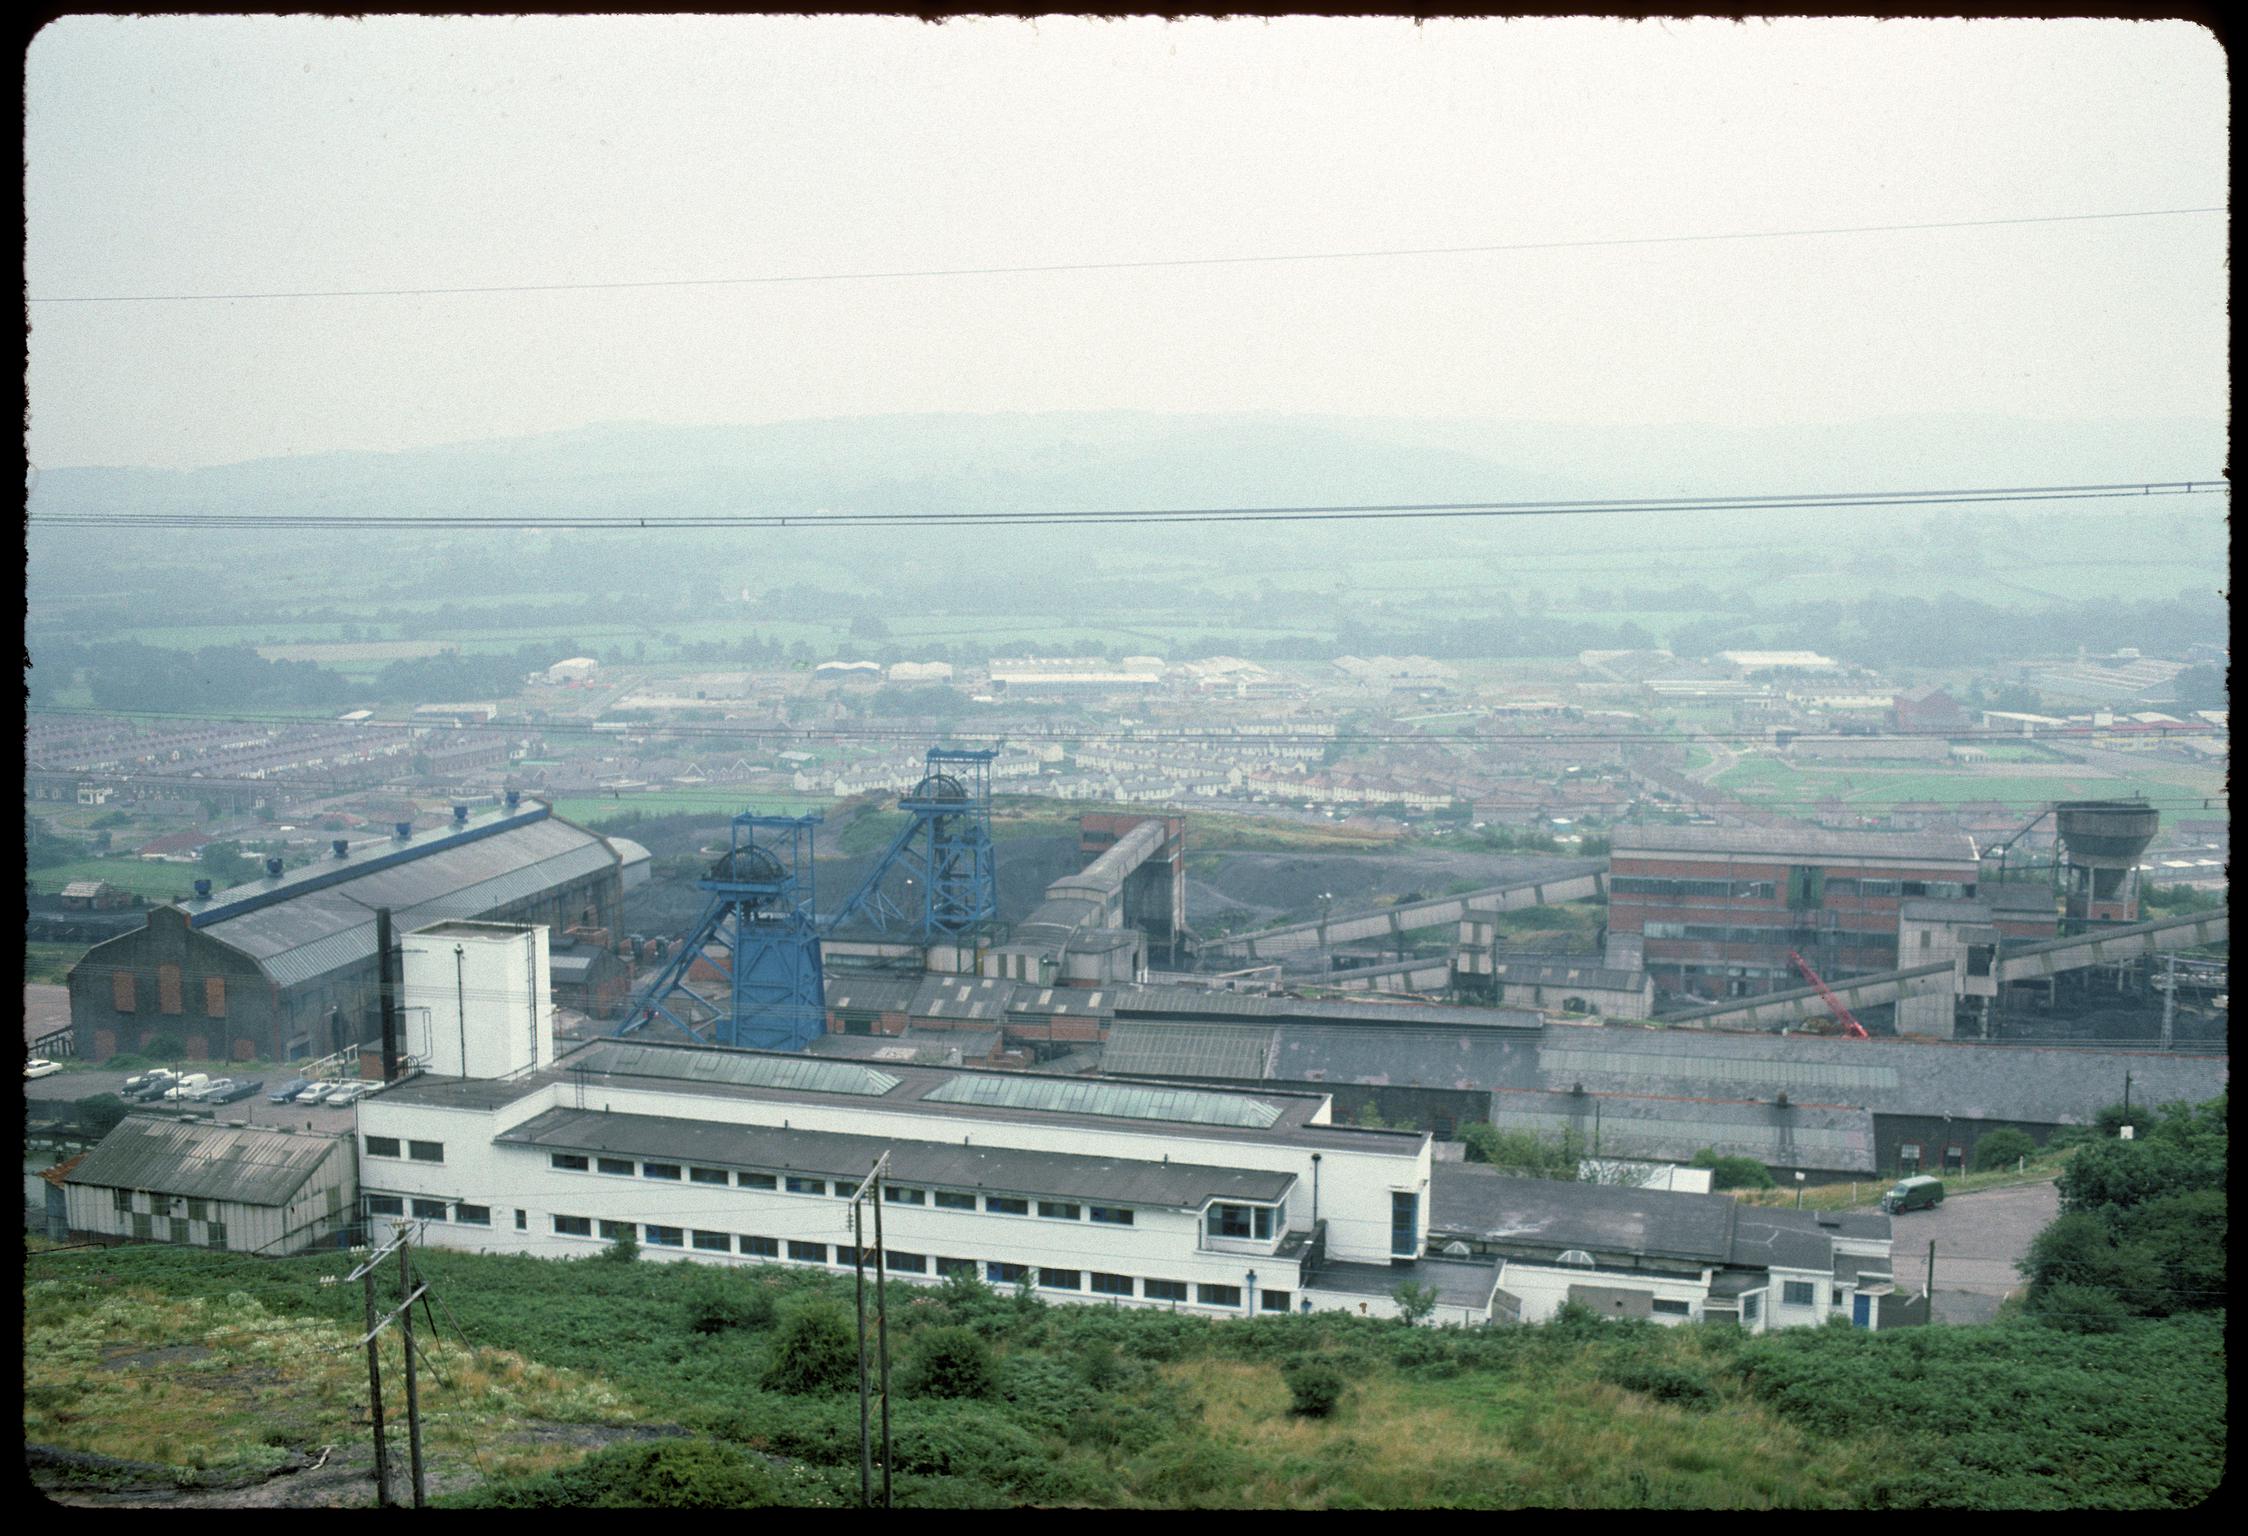 Bedwas Colliery, slide